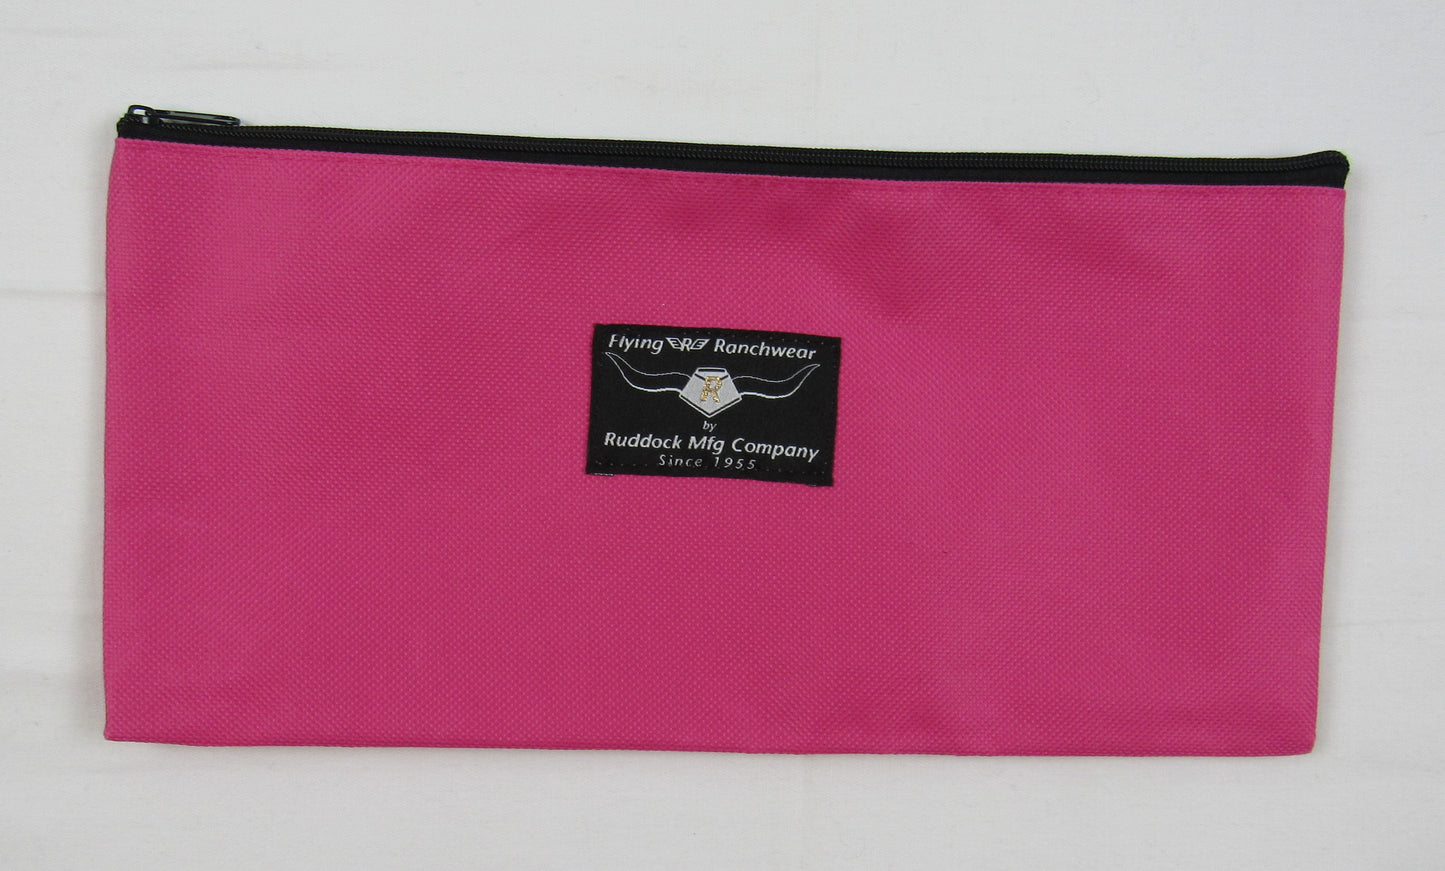 zippered gear bag in bright pink color